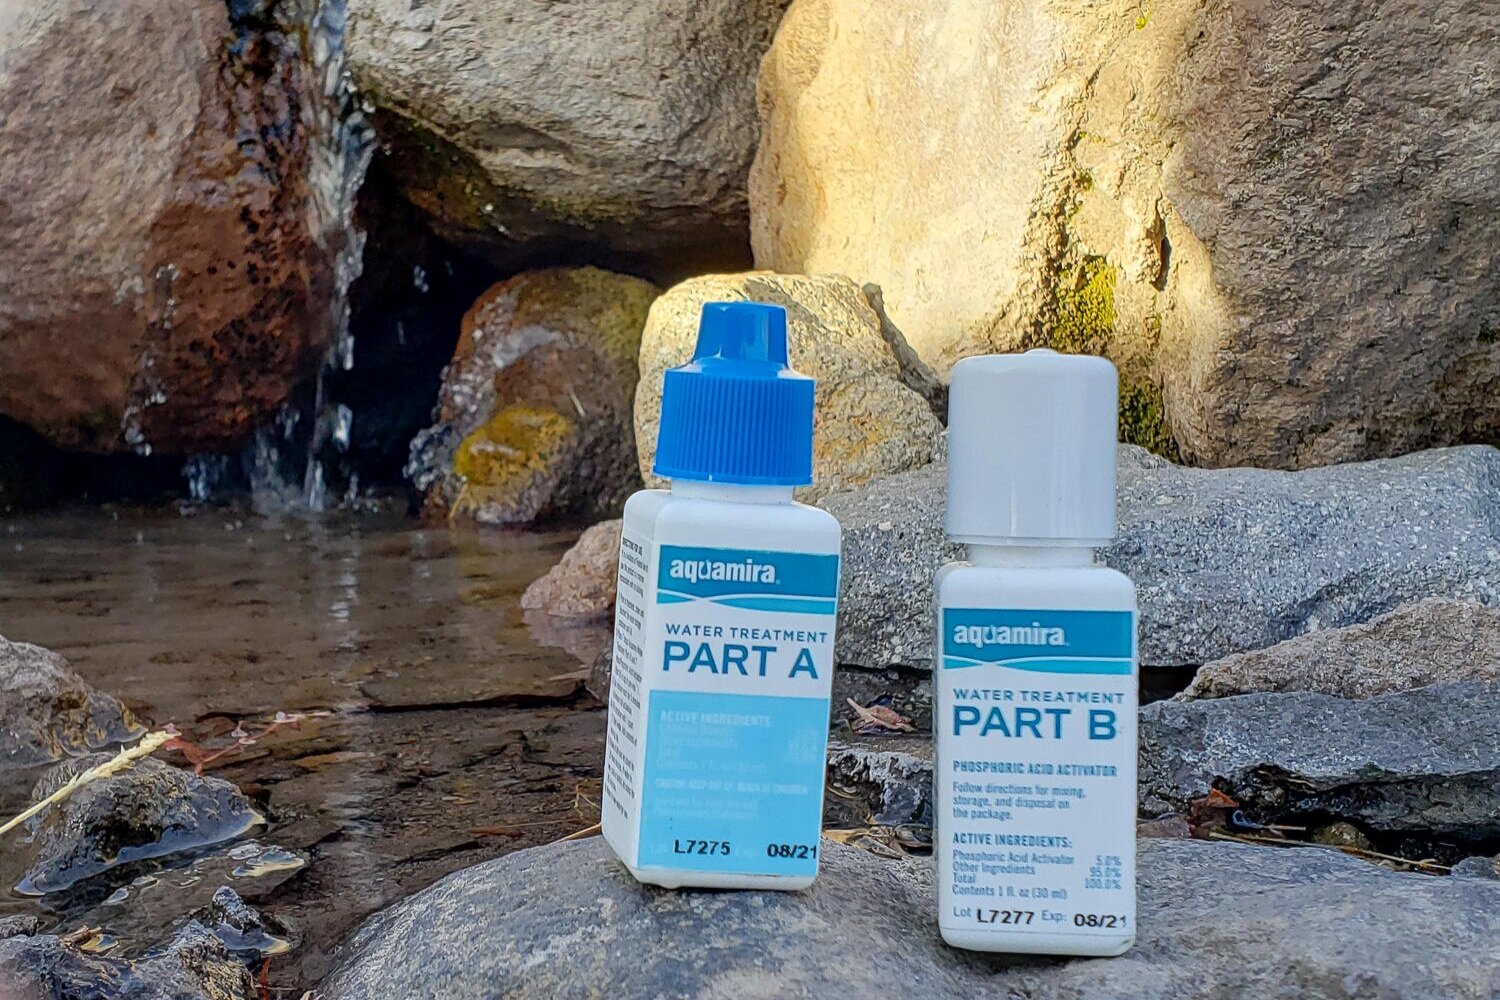 Chlorine Dioxide Drops & Pills are lightweight and compact which makes them easy to bring along as a backup water treatment.